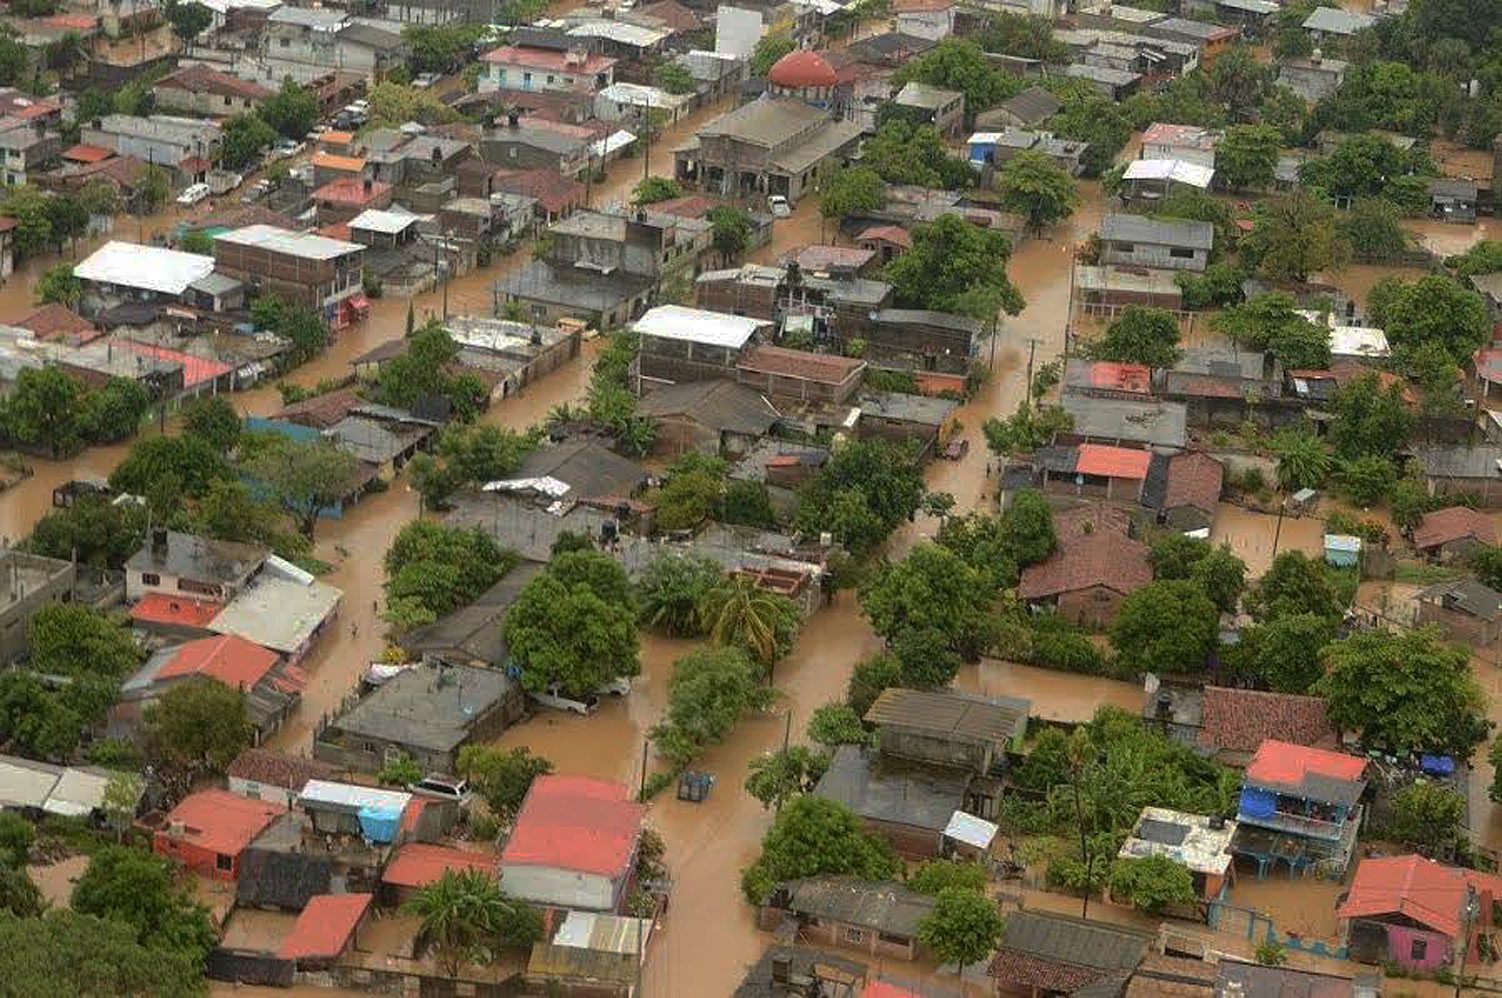 PHOTO: A handout photo made available by the Mexican Information Agency Quadratin on Sept. 6, 2016 shows an aerial view of a zone affected by a flooding caused by heavy rains from hurricane 'Newton' in Benito Juarez, Mexico, Sept. 5, 2016.